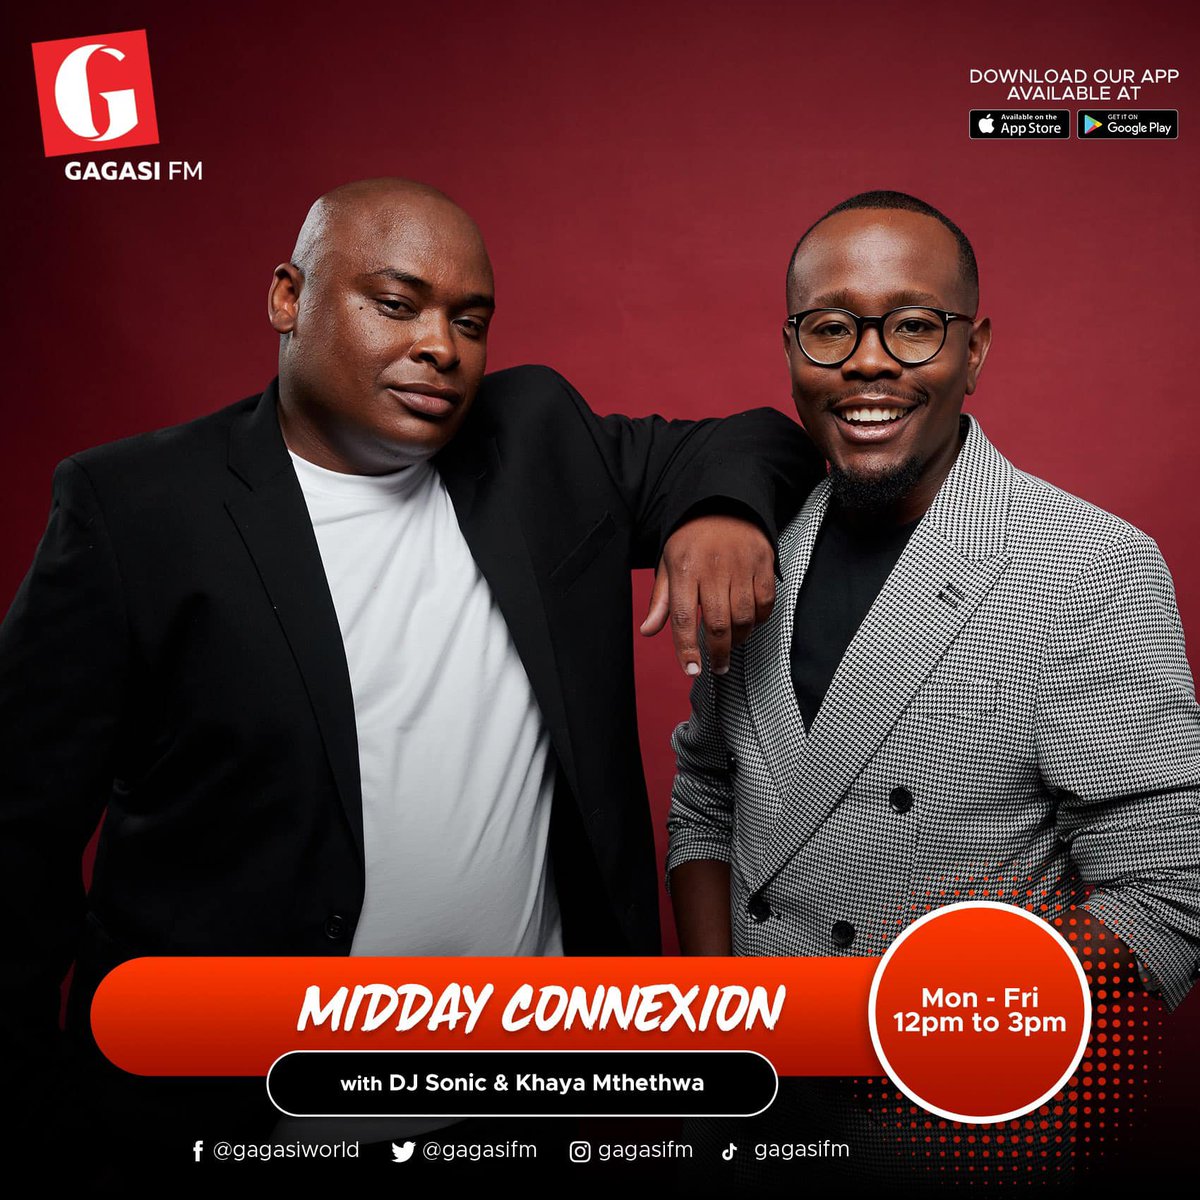 Welcome to the Midday Connexion. It is the #MCM edition. 💐 🎙️: Dj Sonic | Khaya Mthethwa ☎️: 0861 596 596 📱: 078 934 282 💻: gagasi995.co.za #MiddayConnexion #GagasiFM #iRadioImnadiEmini💐